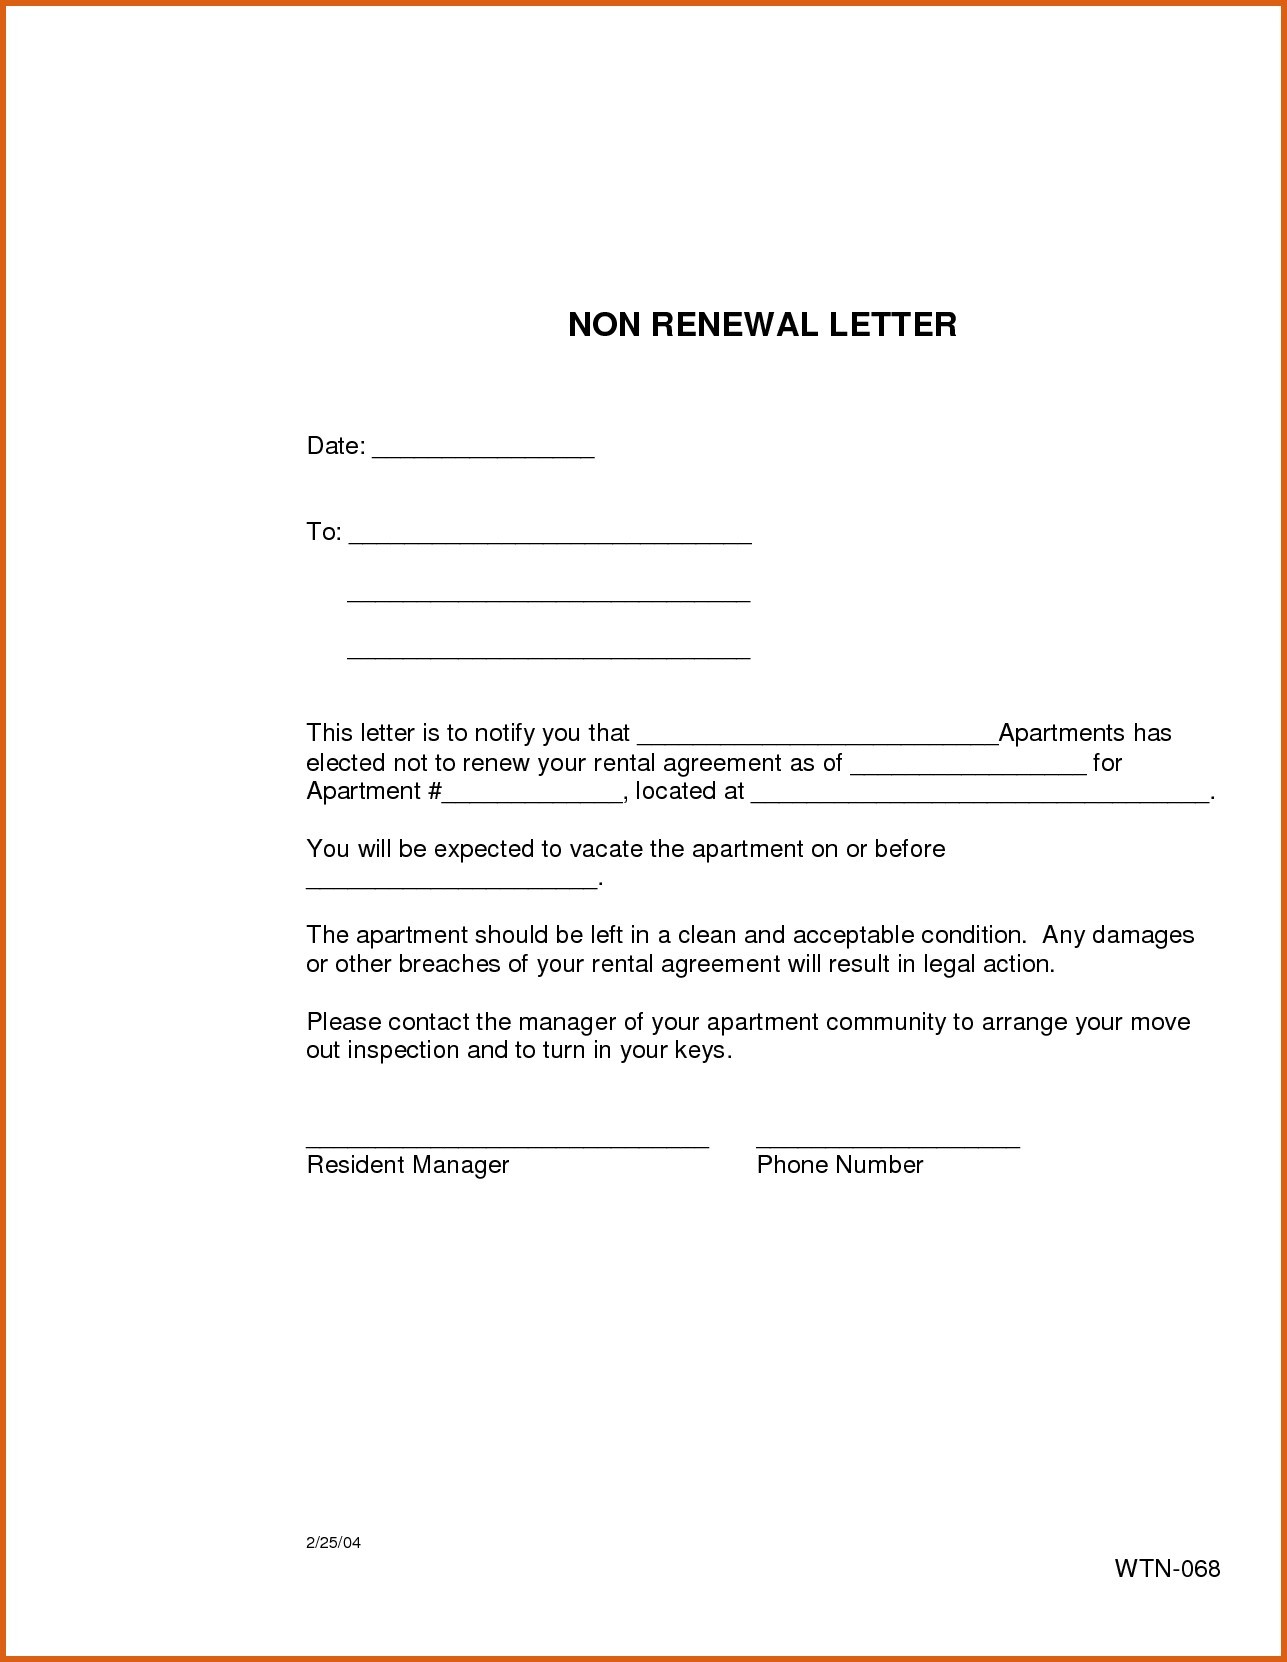 Landlord Tenant Notices – Rental Property Notices | EZ Landlord Forms